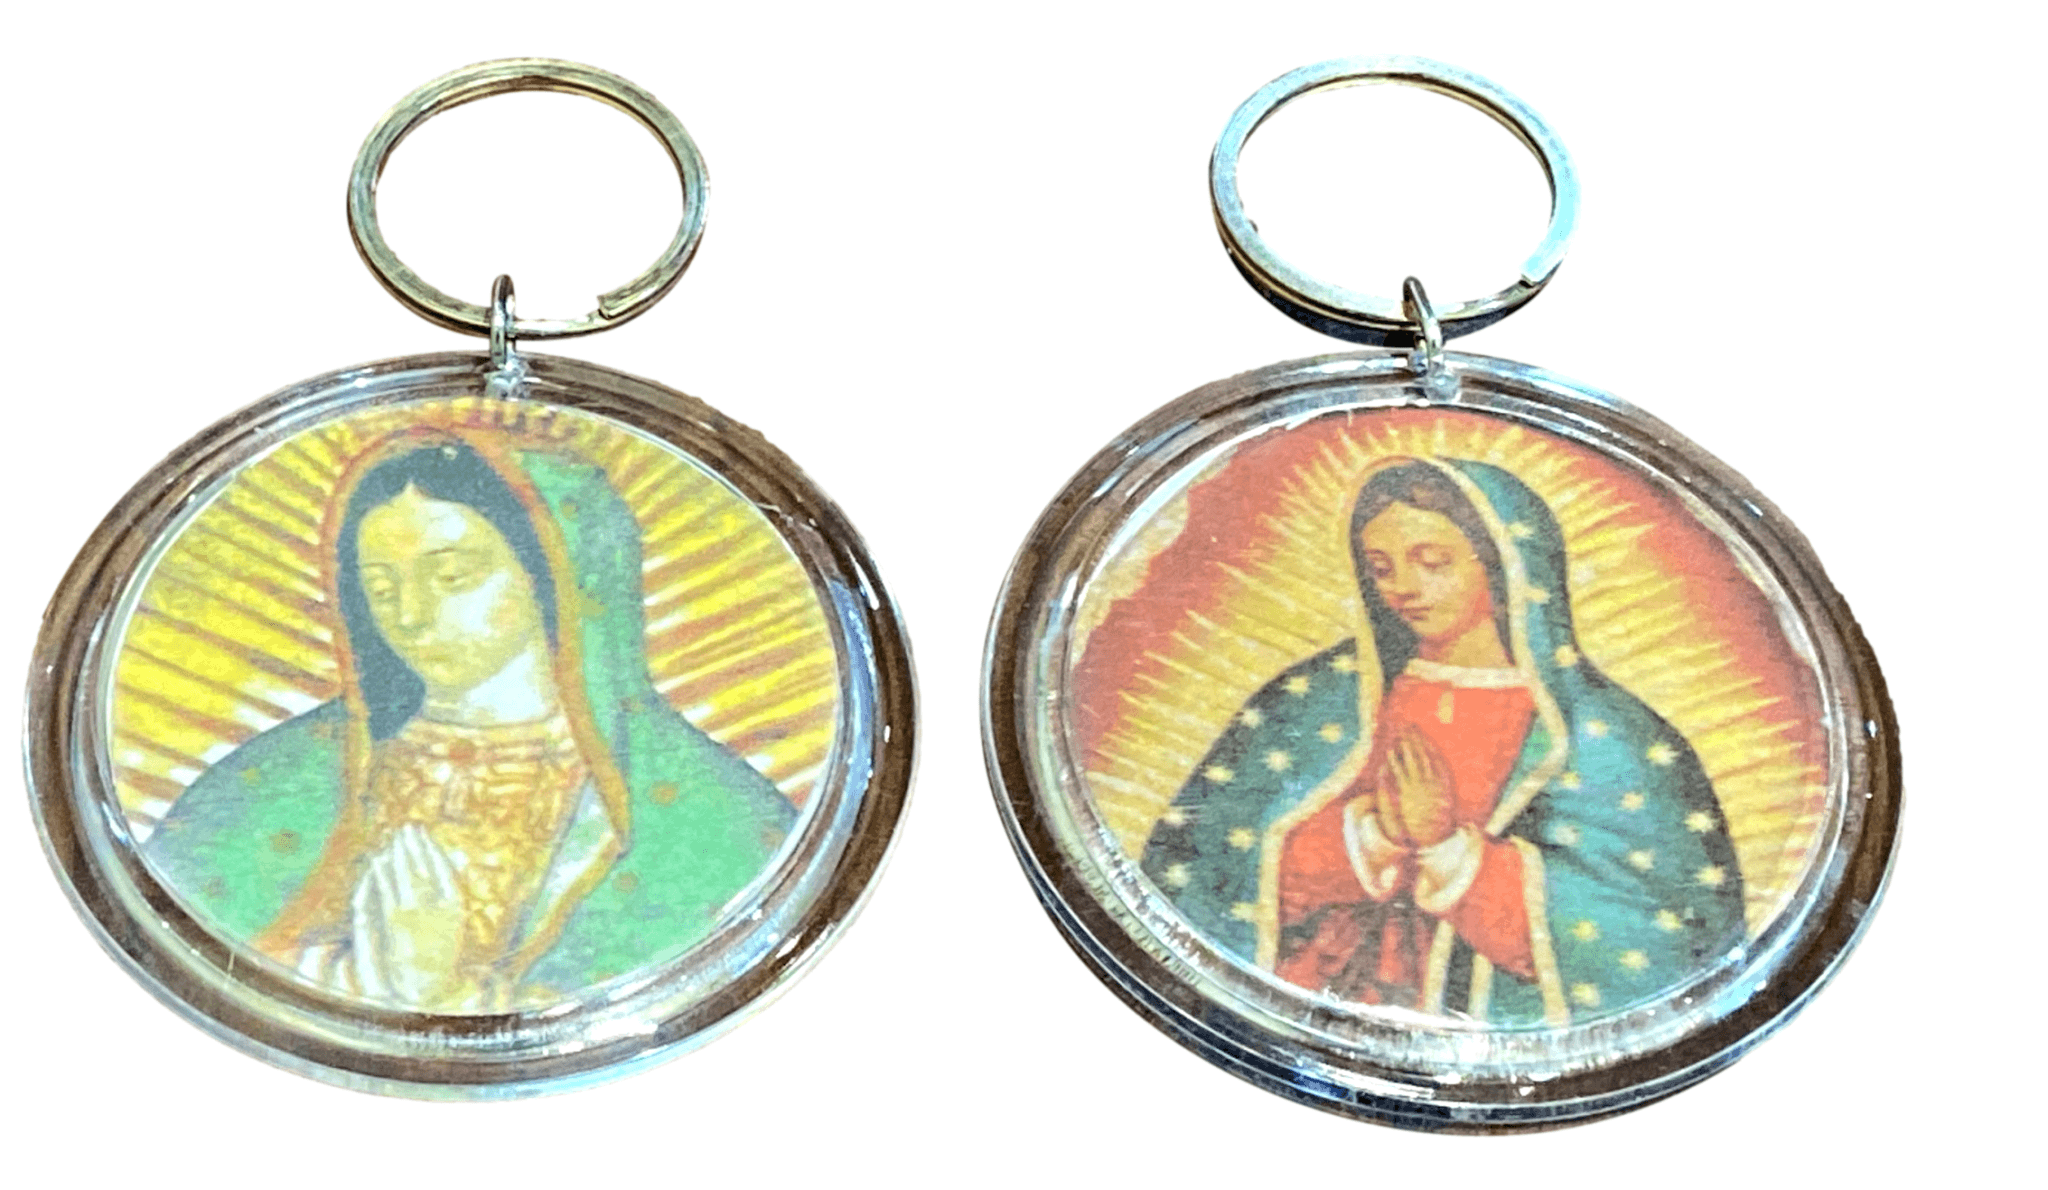 Keychain Round Virgen de Guadalupe Handcrafted by Local Artist Ramon Approximate Diameter: 2.75in - Ysleta Mission Gift Shop- VOTED El Paso's Best Gift Shop